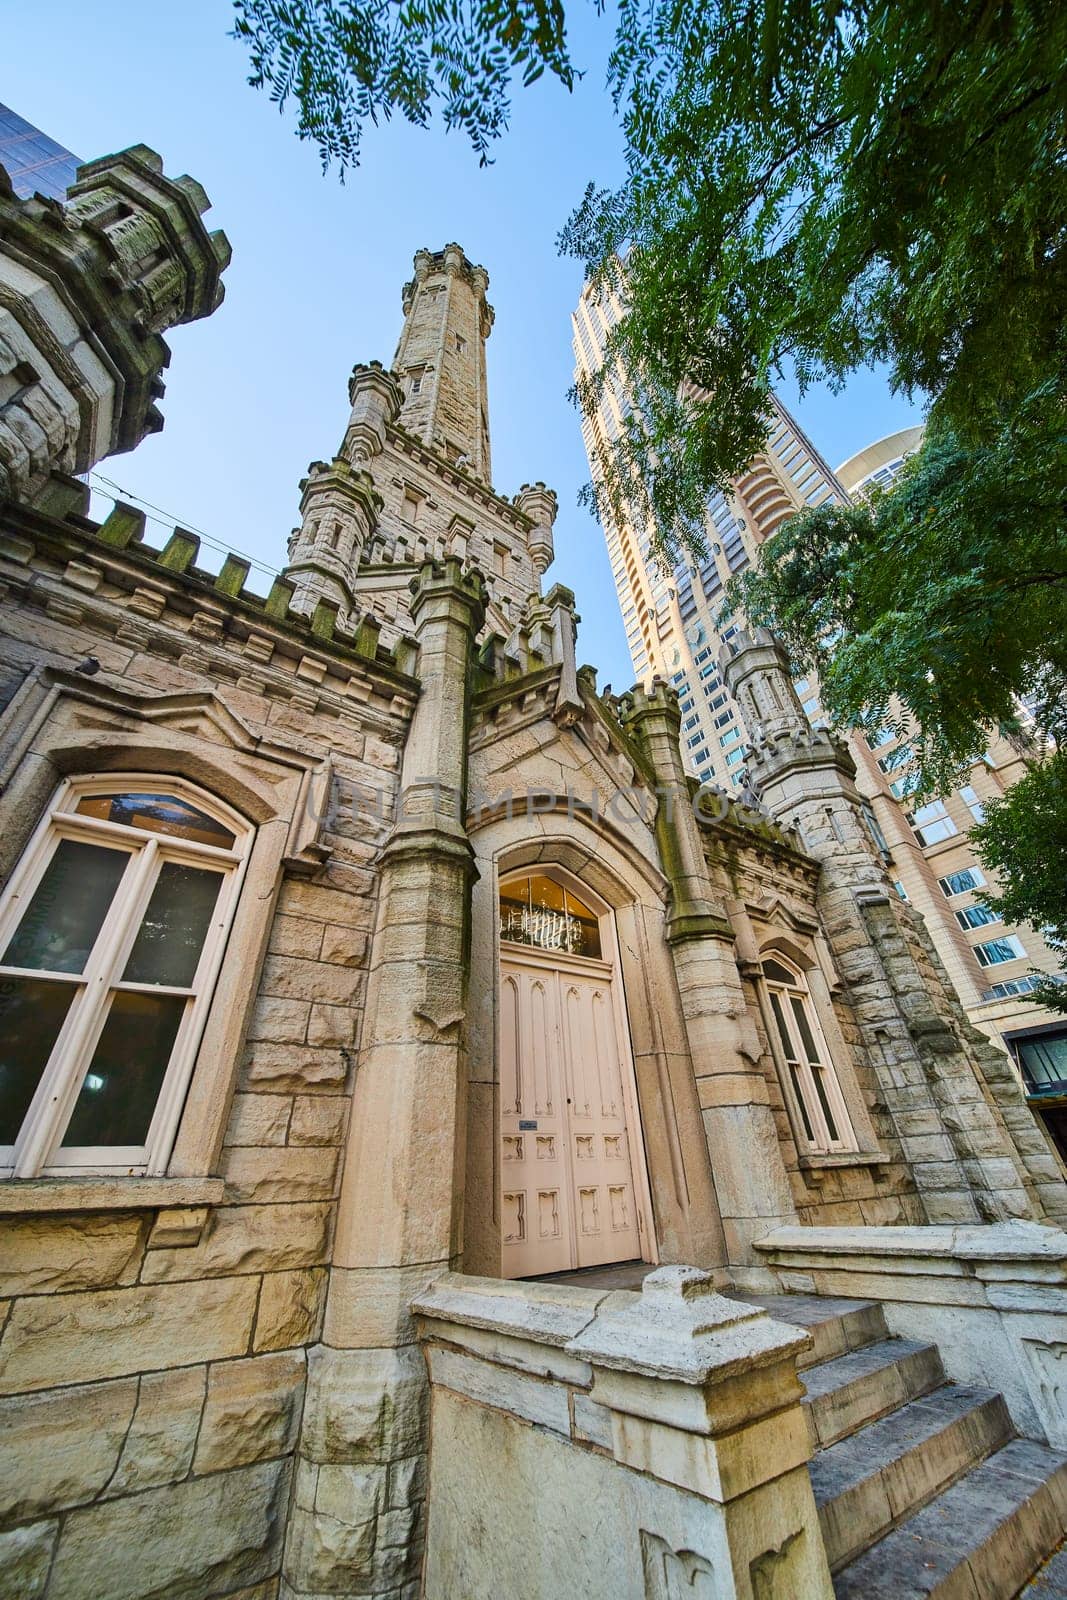 Image of Entrance and tower of Chicago water tower with lush green tree, tourism of city, historic attraction